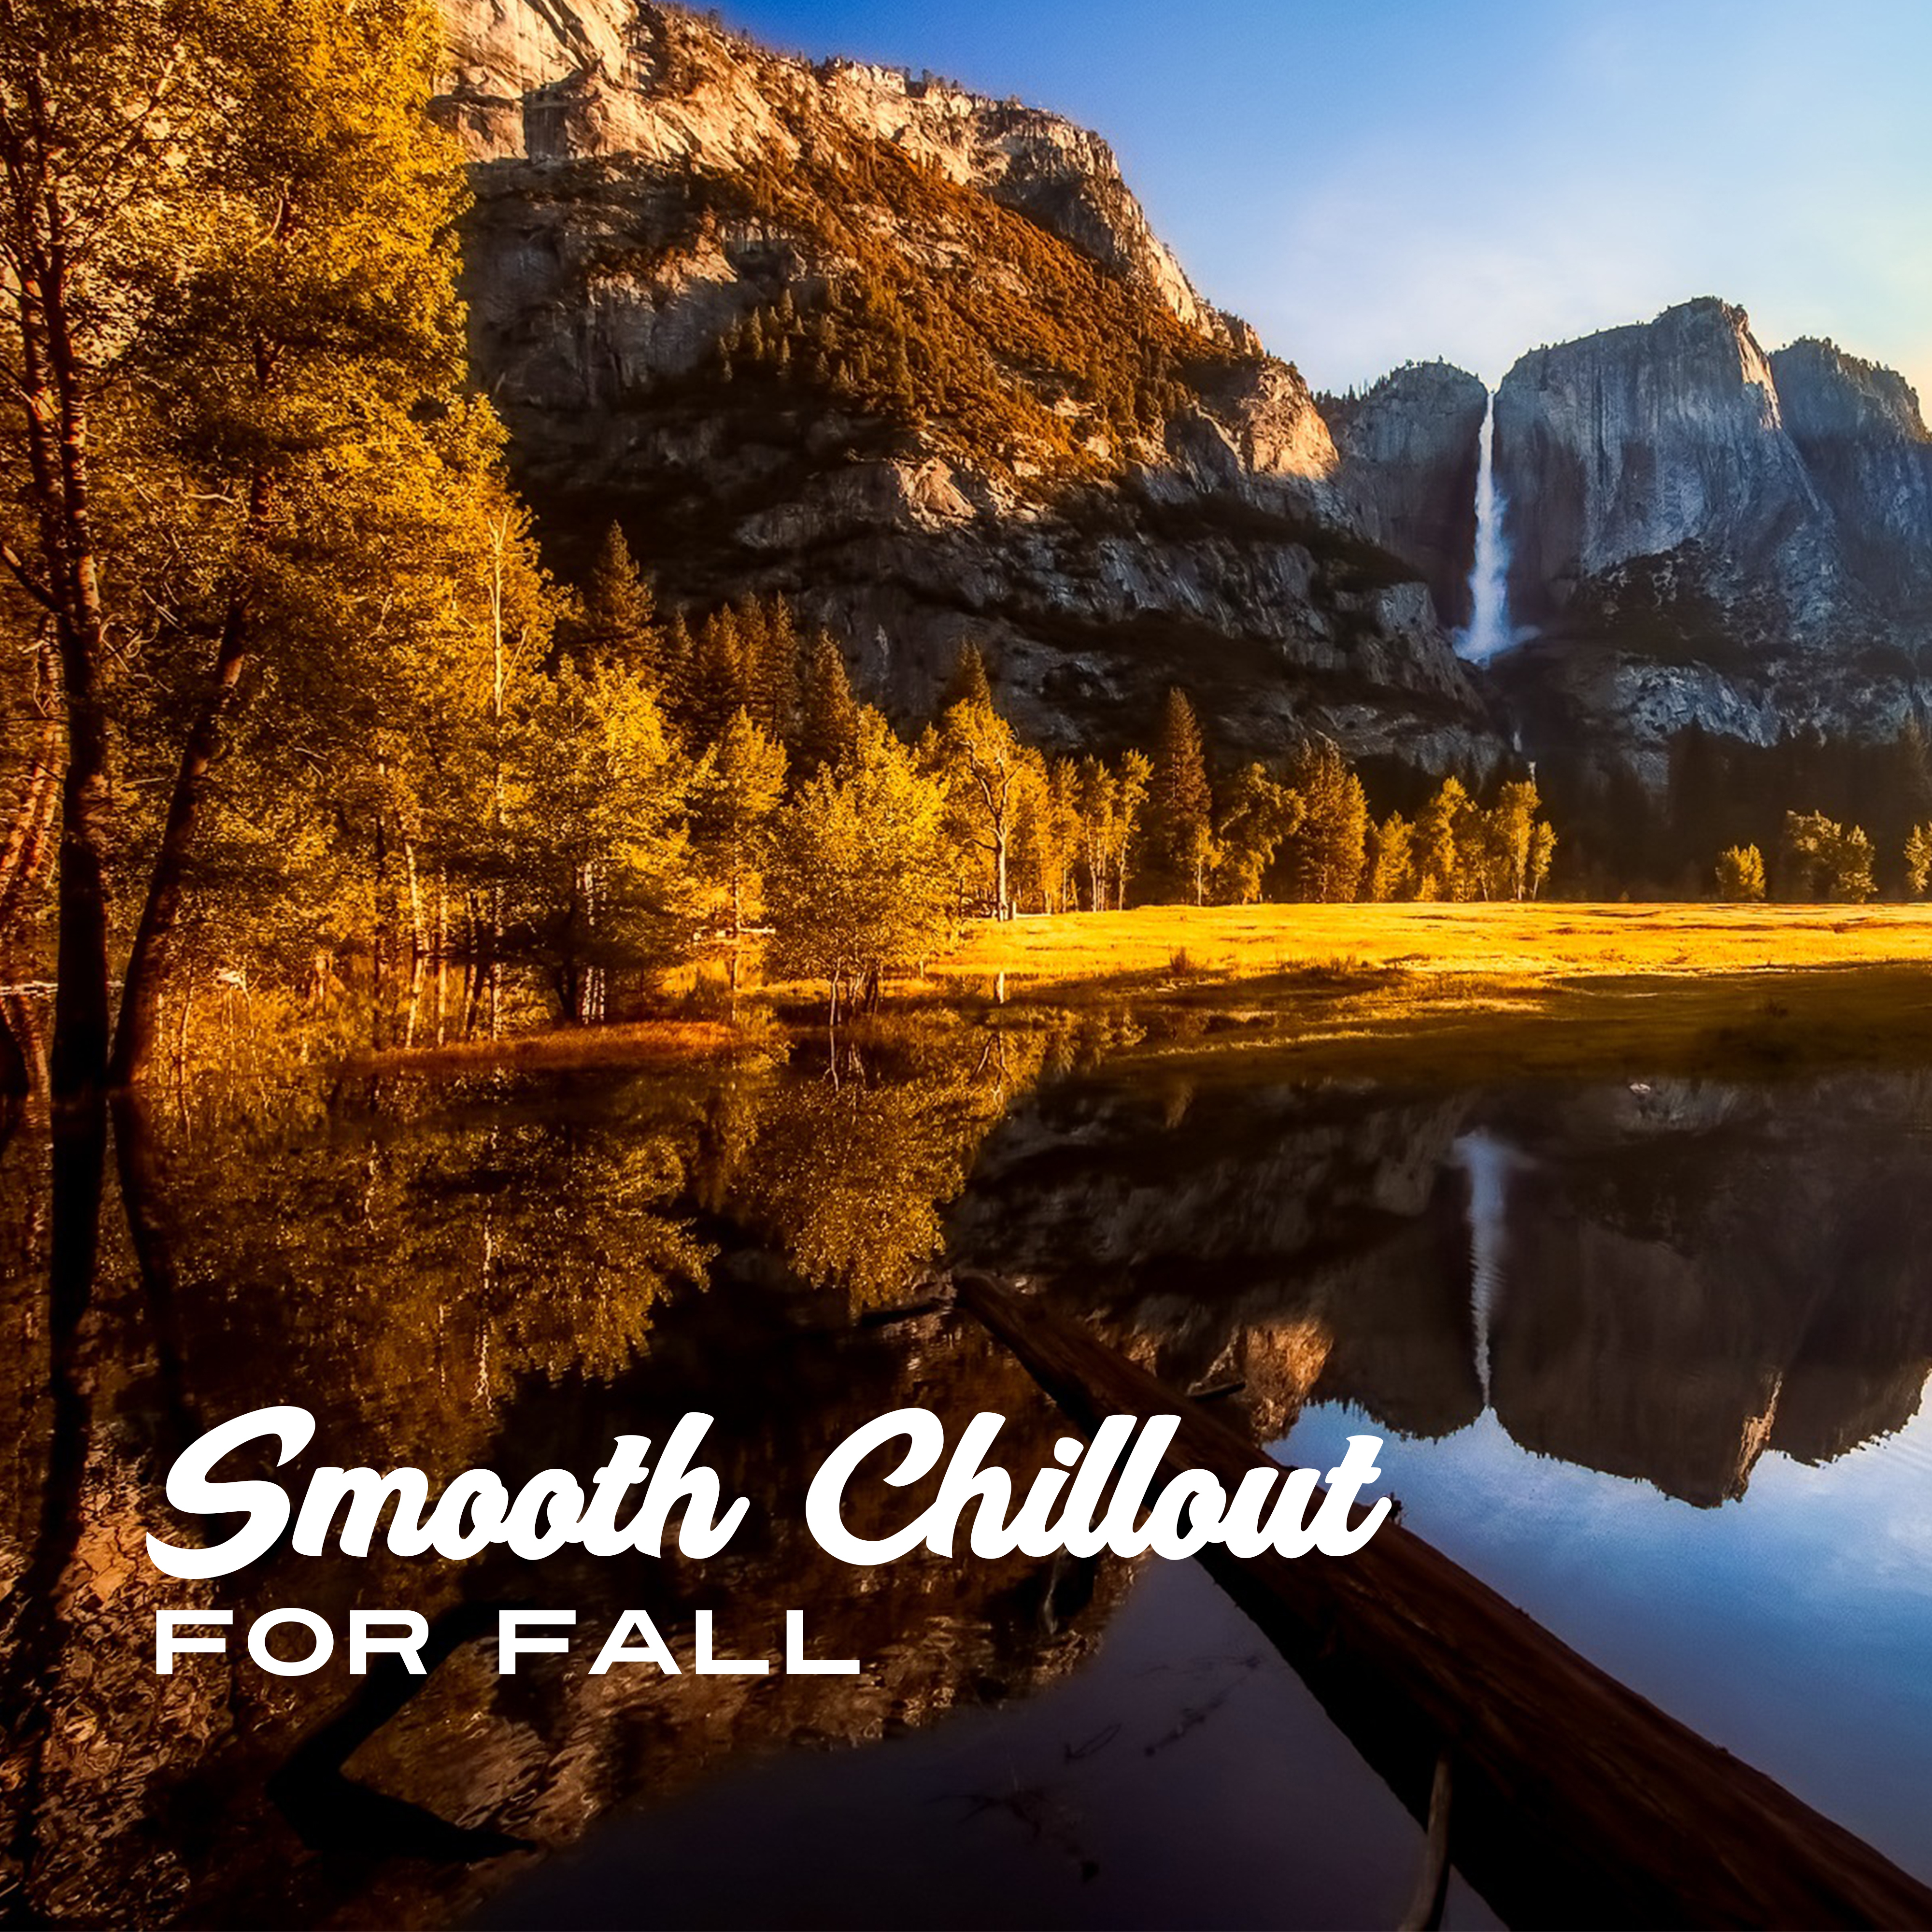 Smooth Chillout for Fall